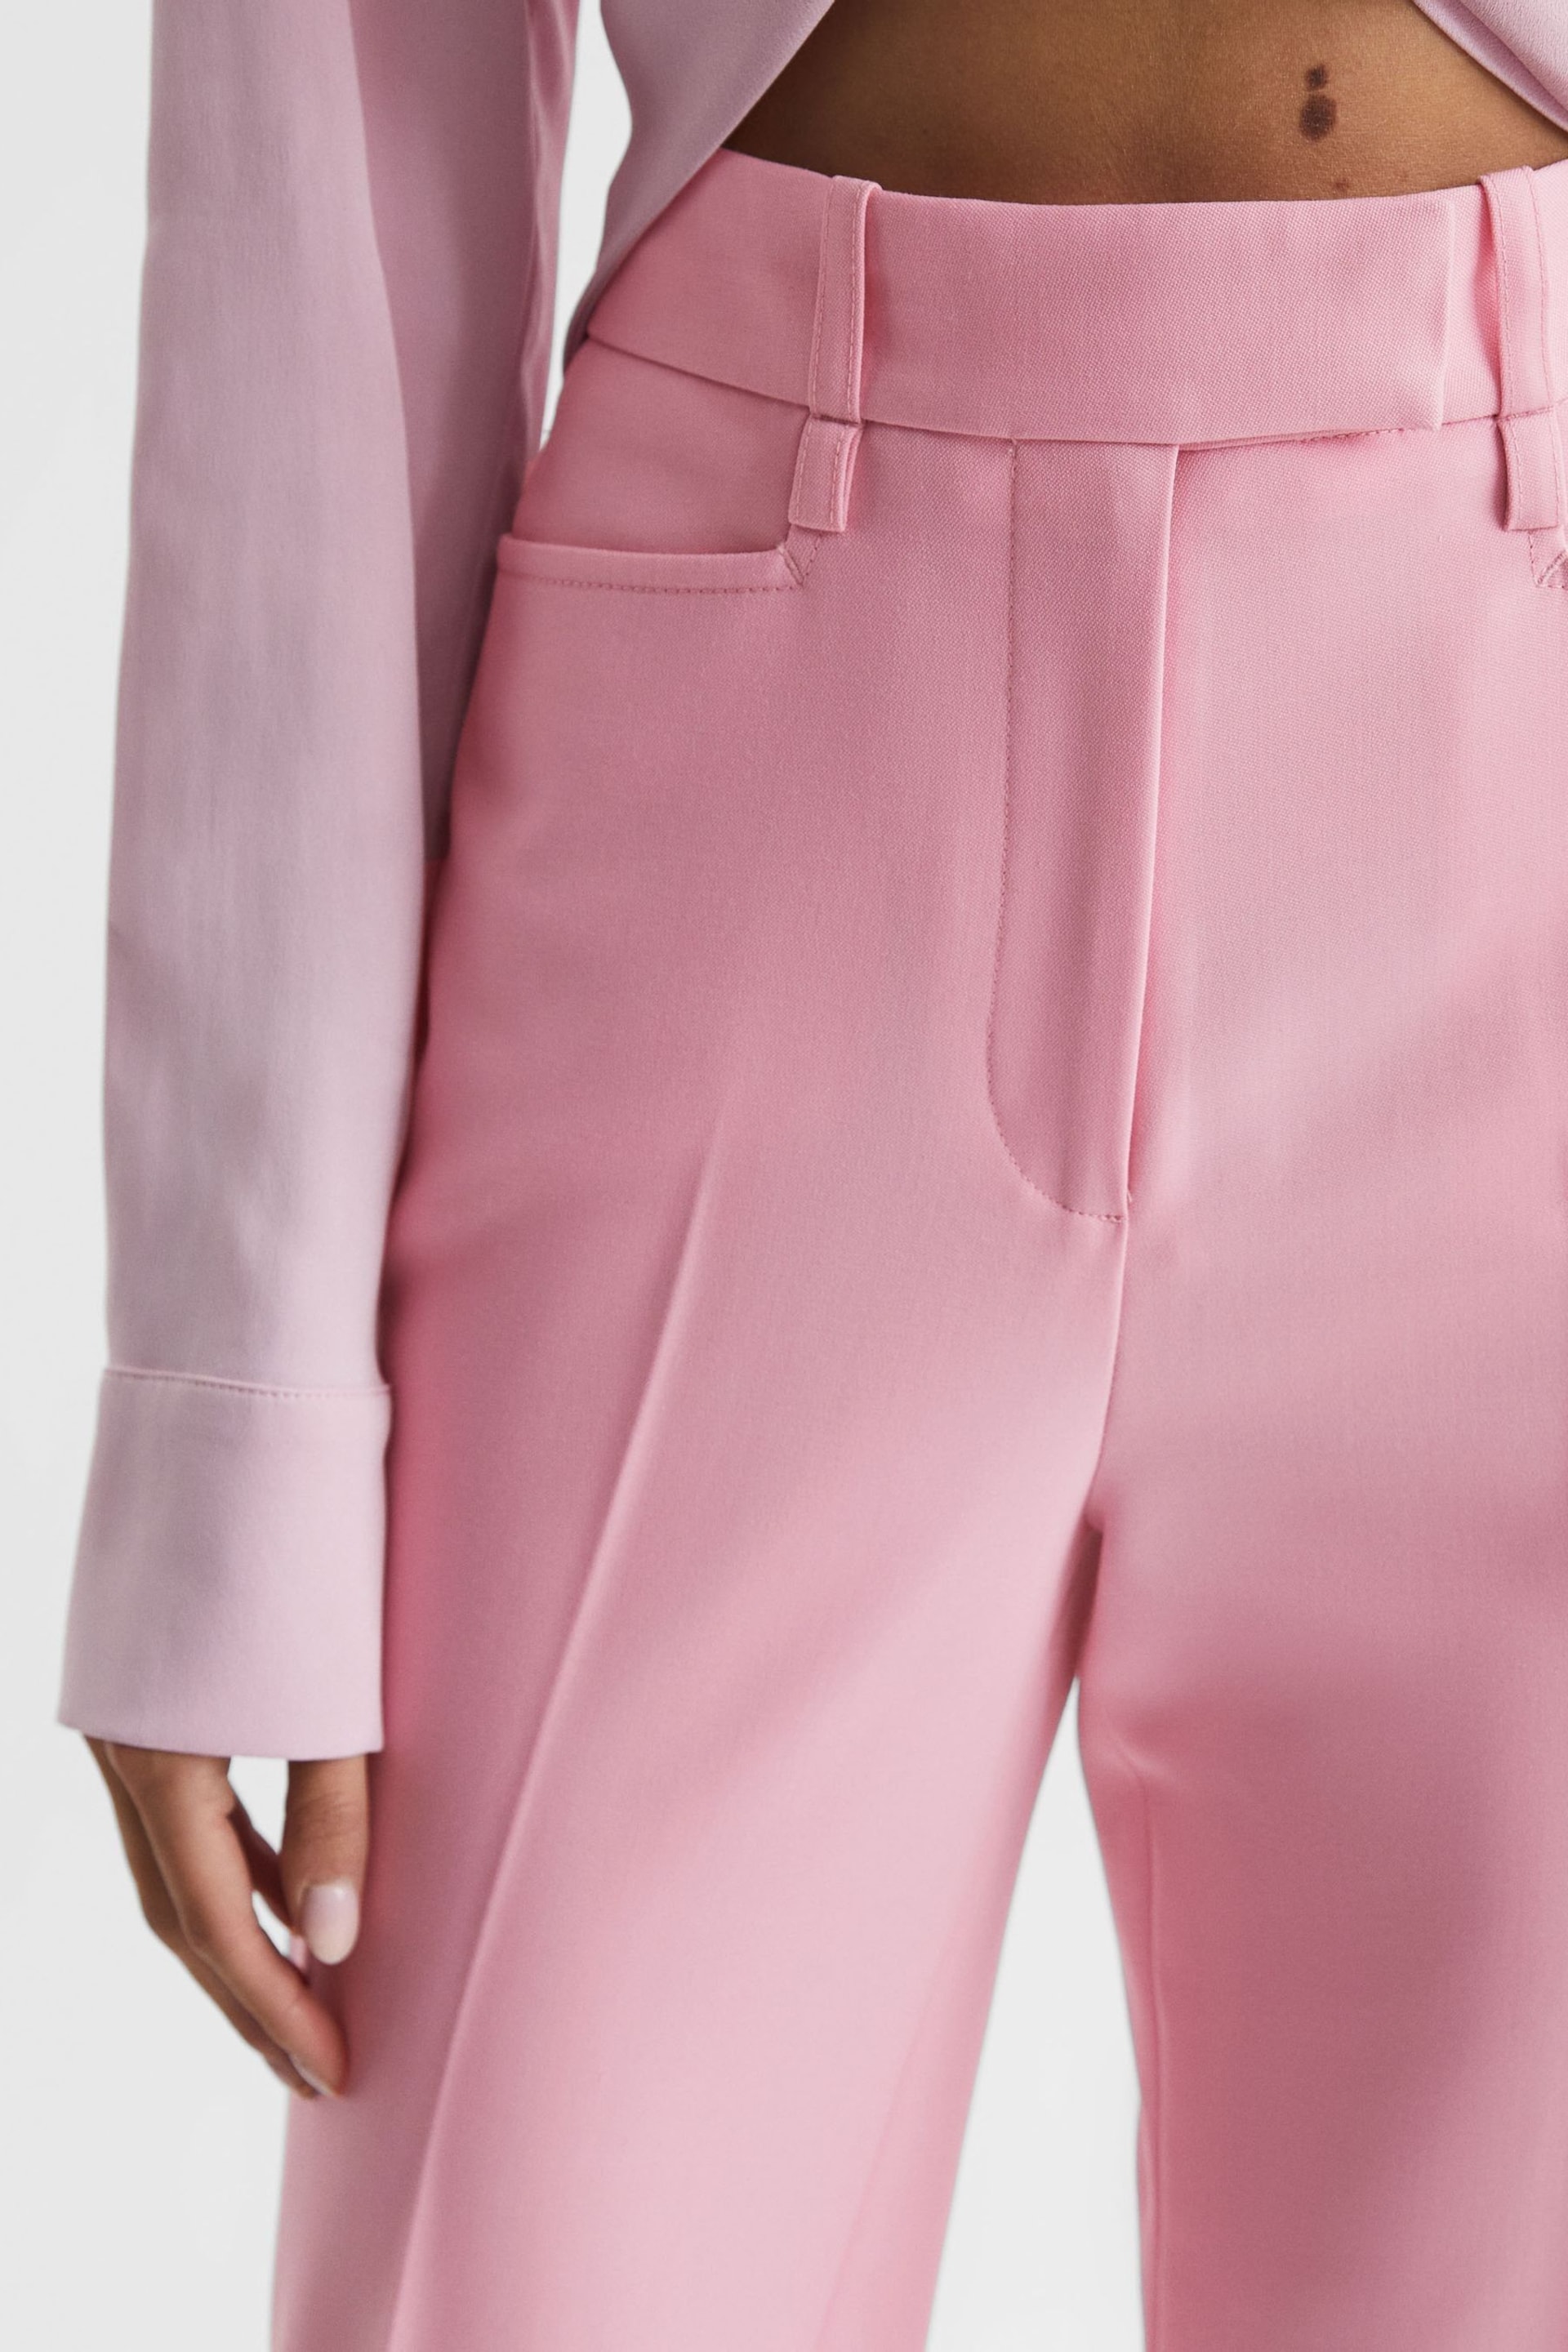 Reiss Pink Blair High Rise Wide Leg Trousers - Image 4 of 8